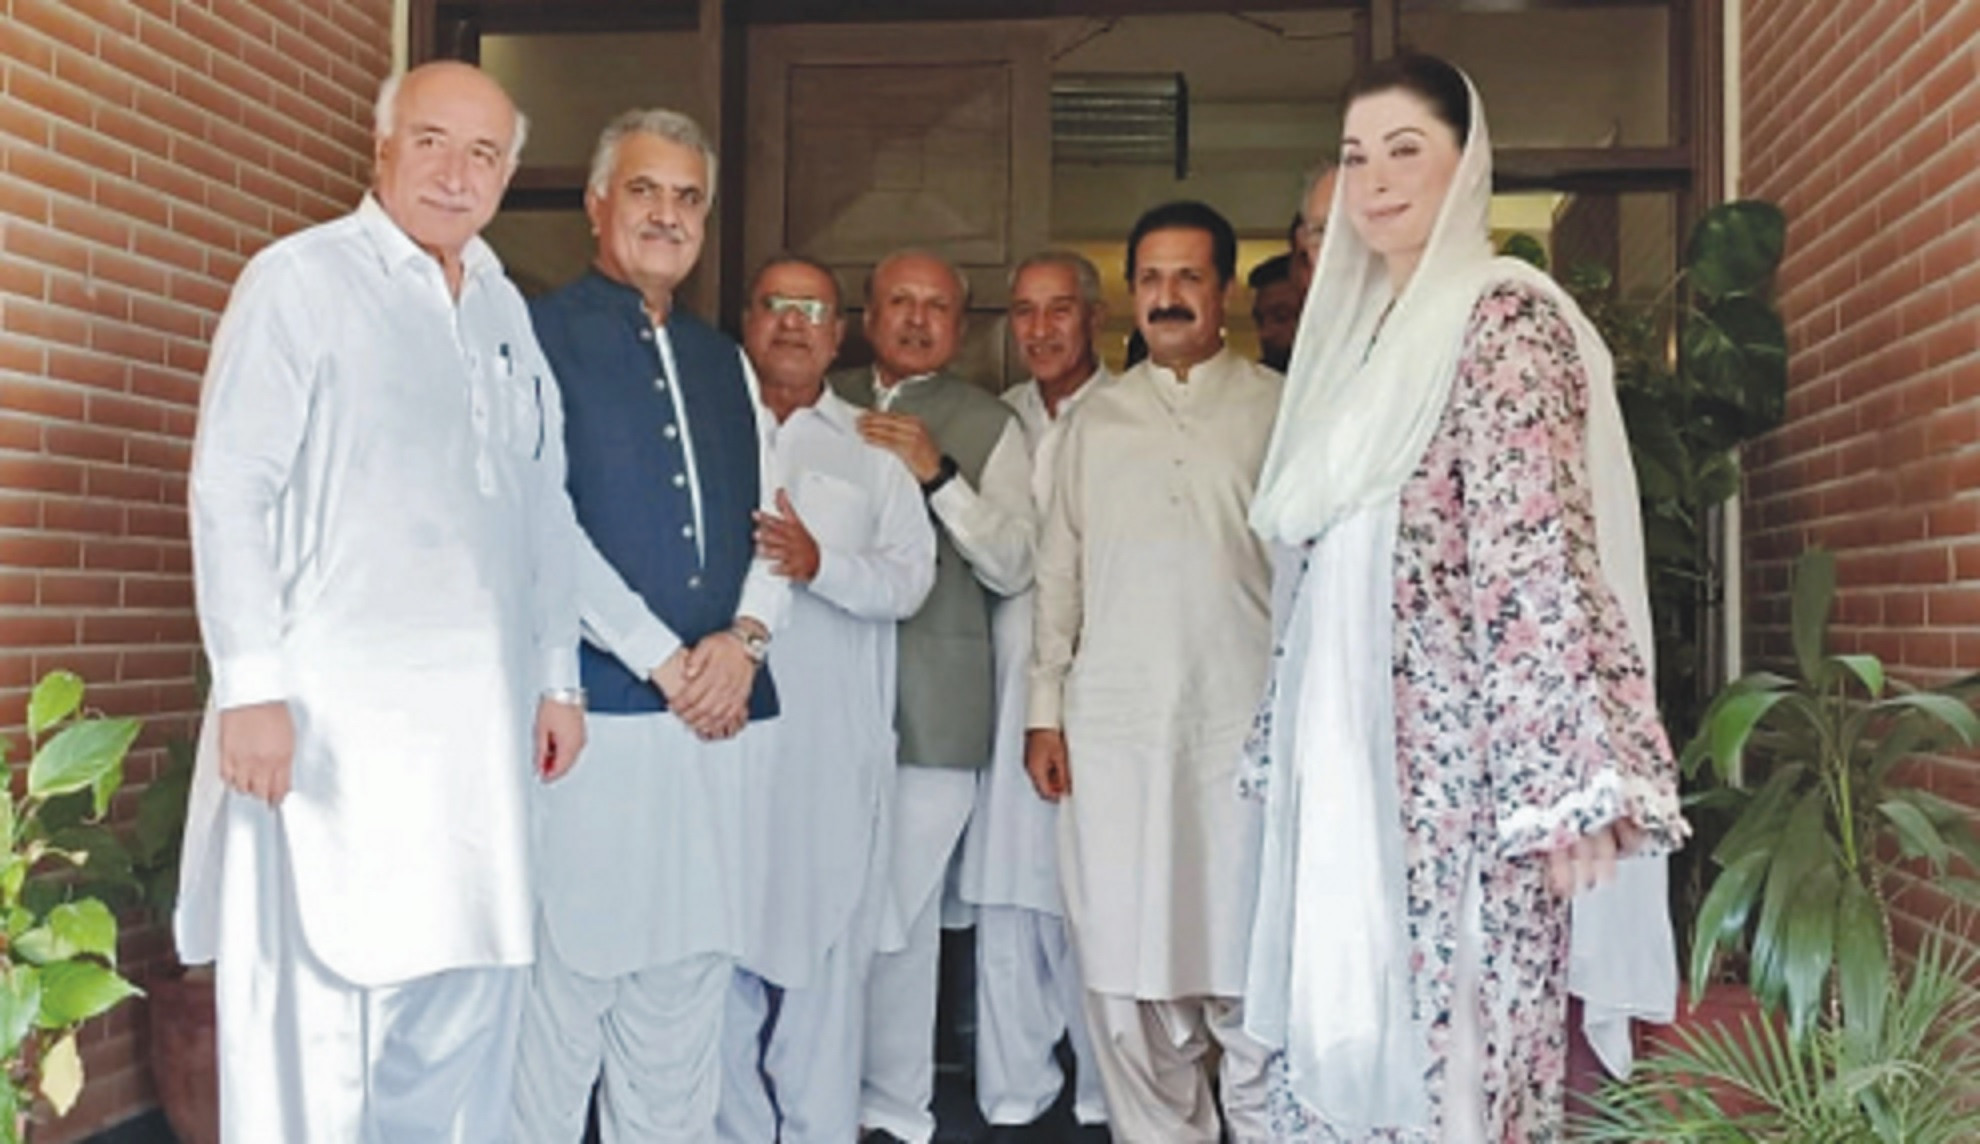 pml n chief organiser maryam nawaz poses with the party s balochistan leadership in quetta photo online